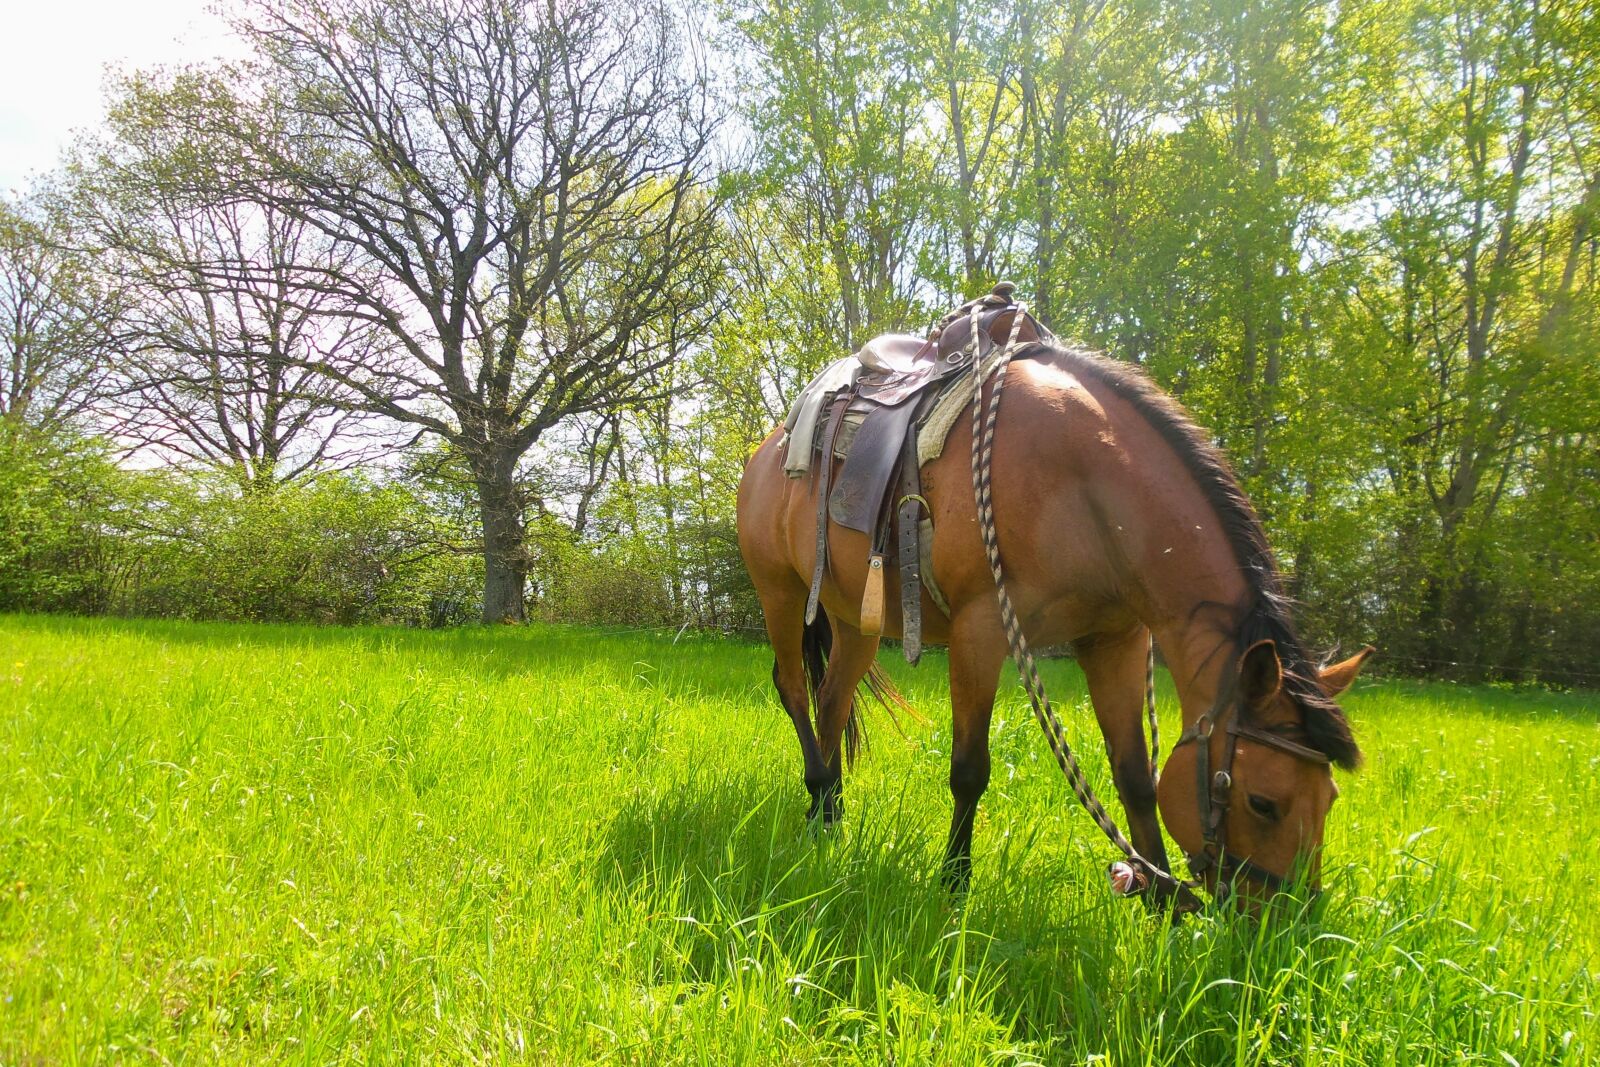 Samsung Galaxy S4 Zoom sample photo. Horse, meadow, trees photography